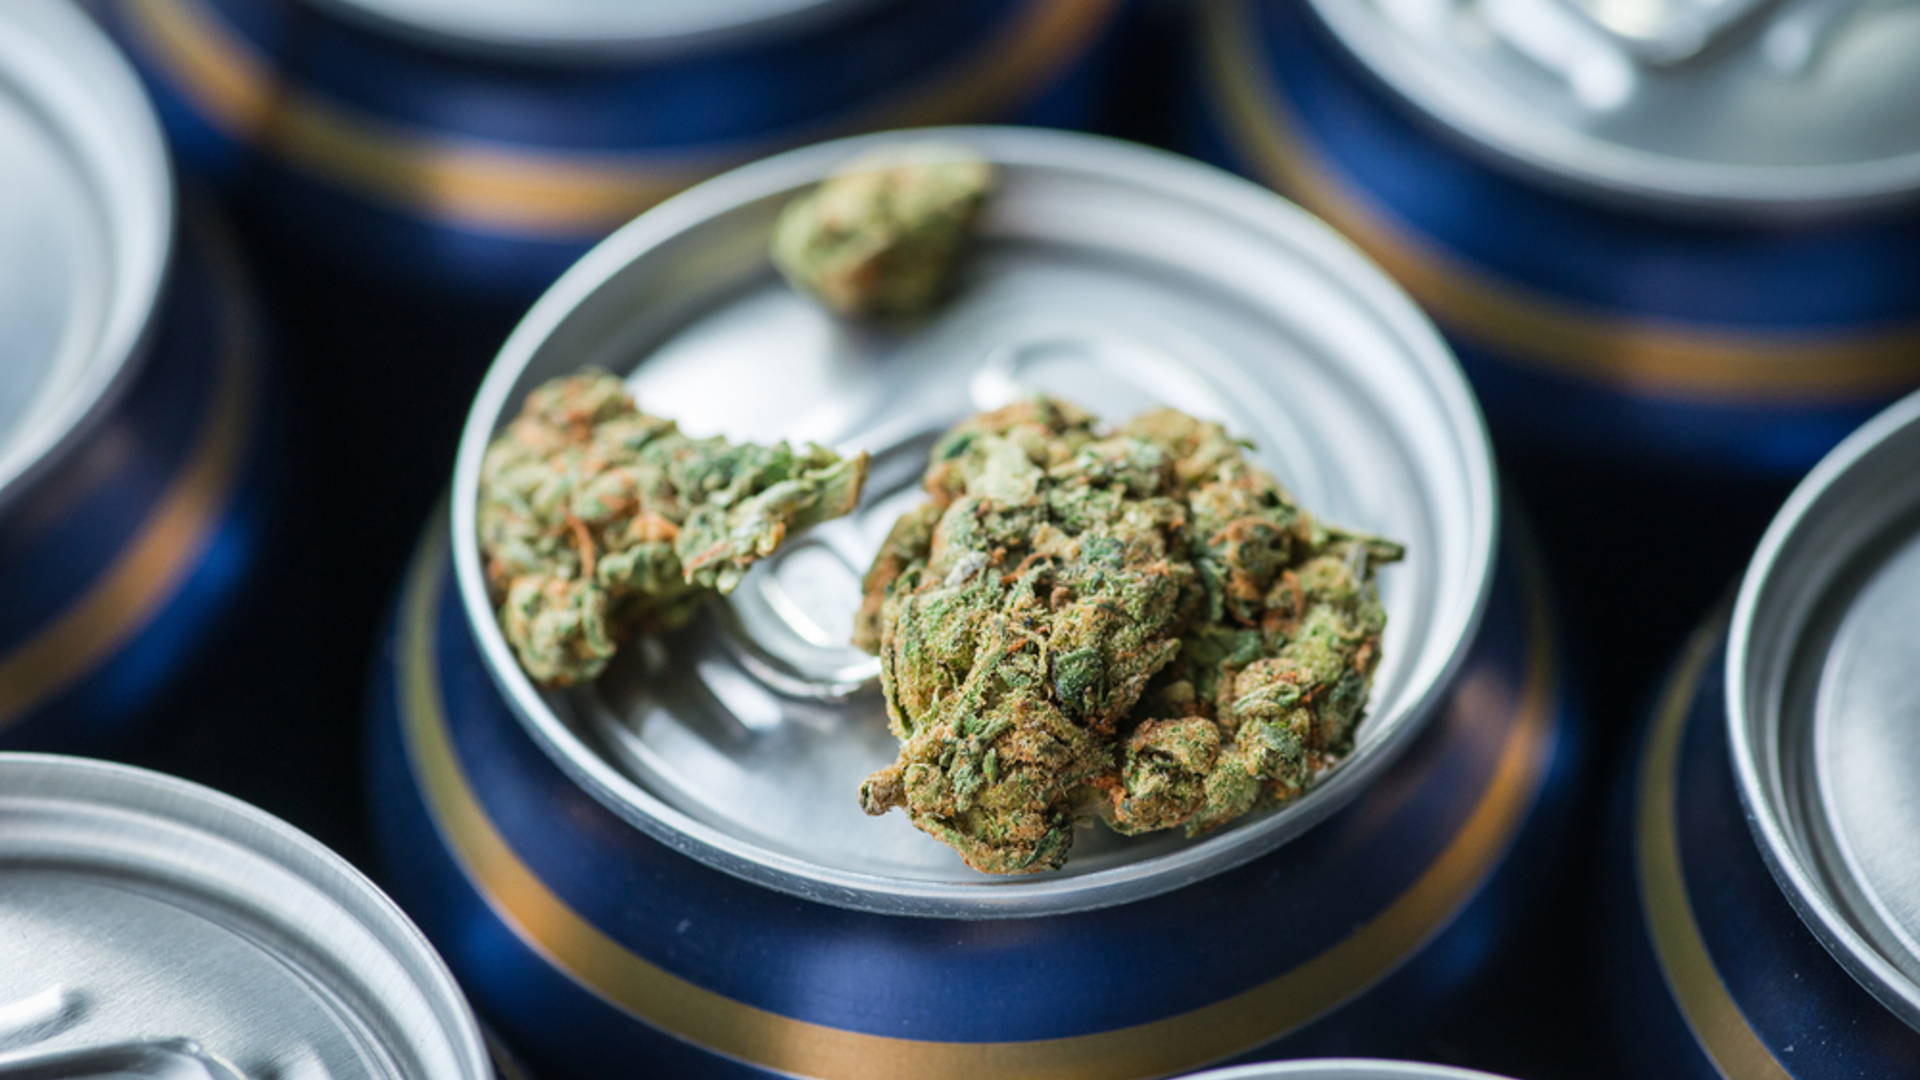 Featured image for Suds with Buds? Marijuana-infused Beer on the Rise